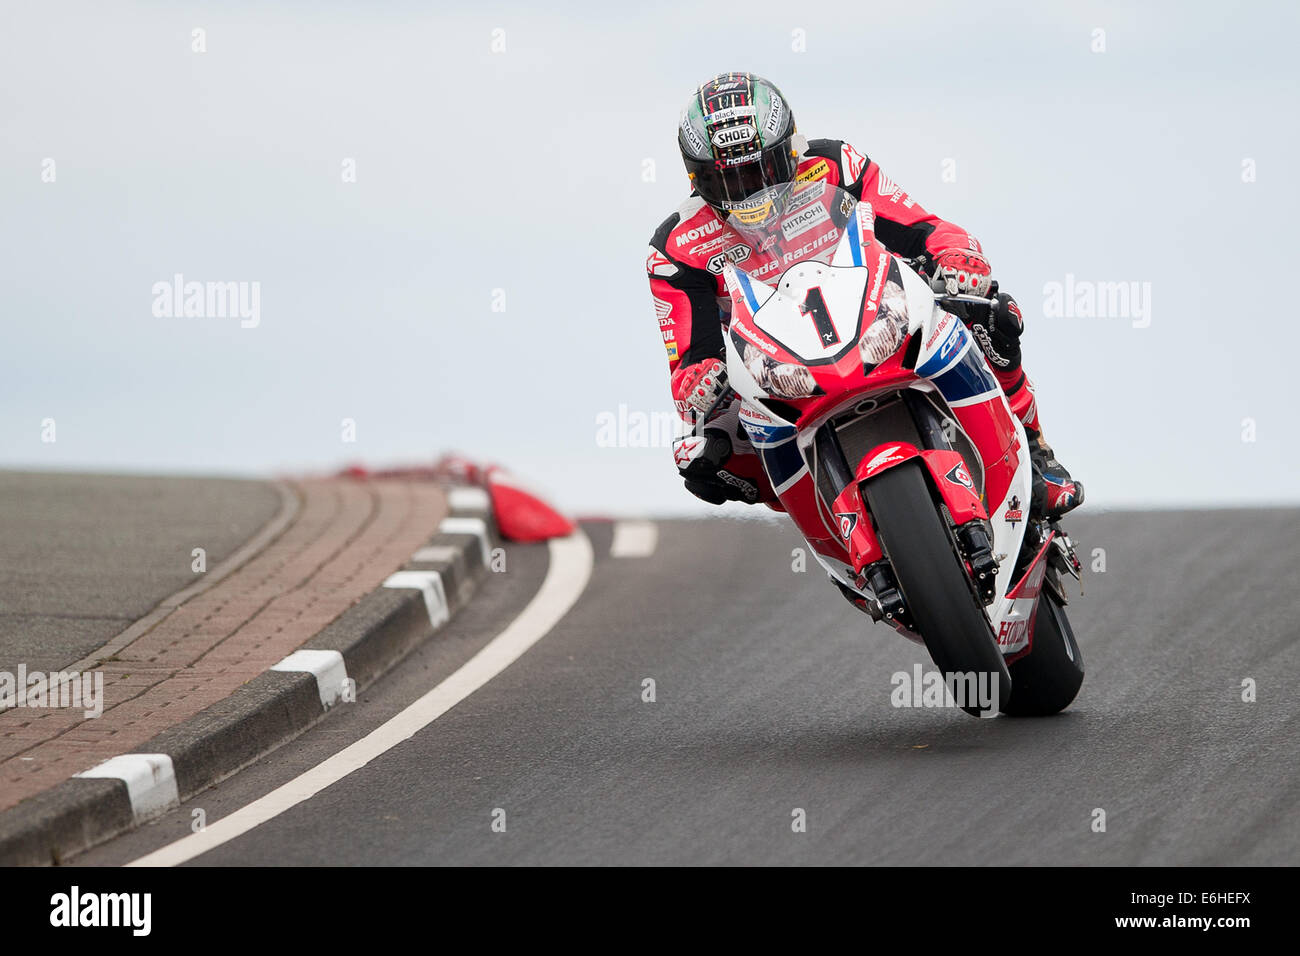 John McGuinness during the Vauxhall Superbike Race at the Northwest 200 Stock Photo